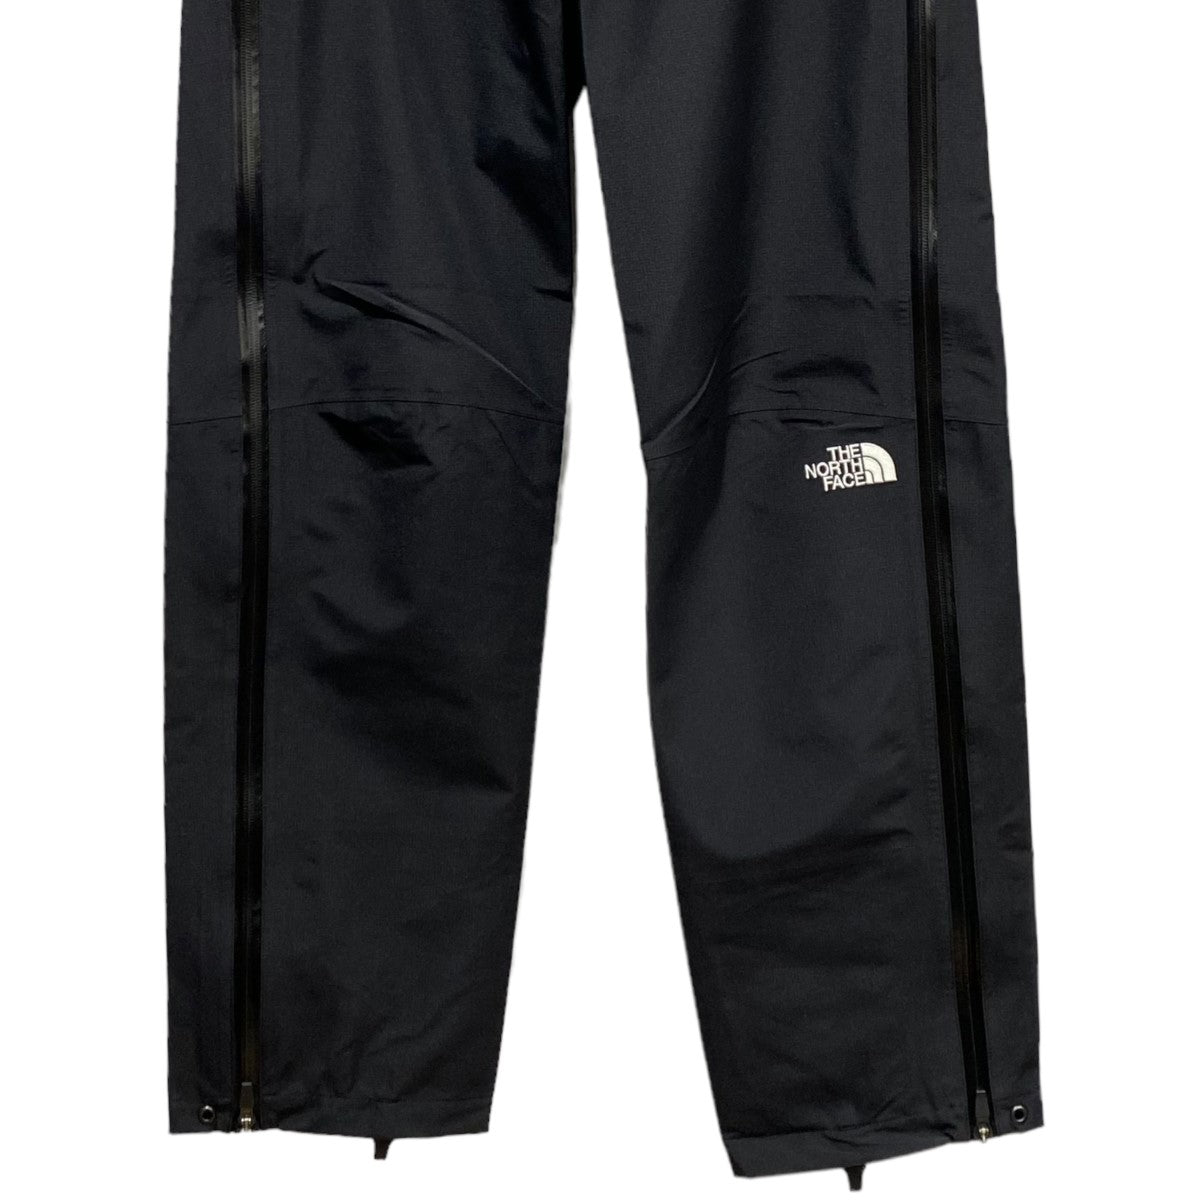 THE NORTH FACE(ザノースフェイス) ALL MOUNTAIN PANTGORE-TEXナイロンパンツNP61709